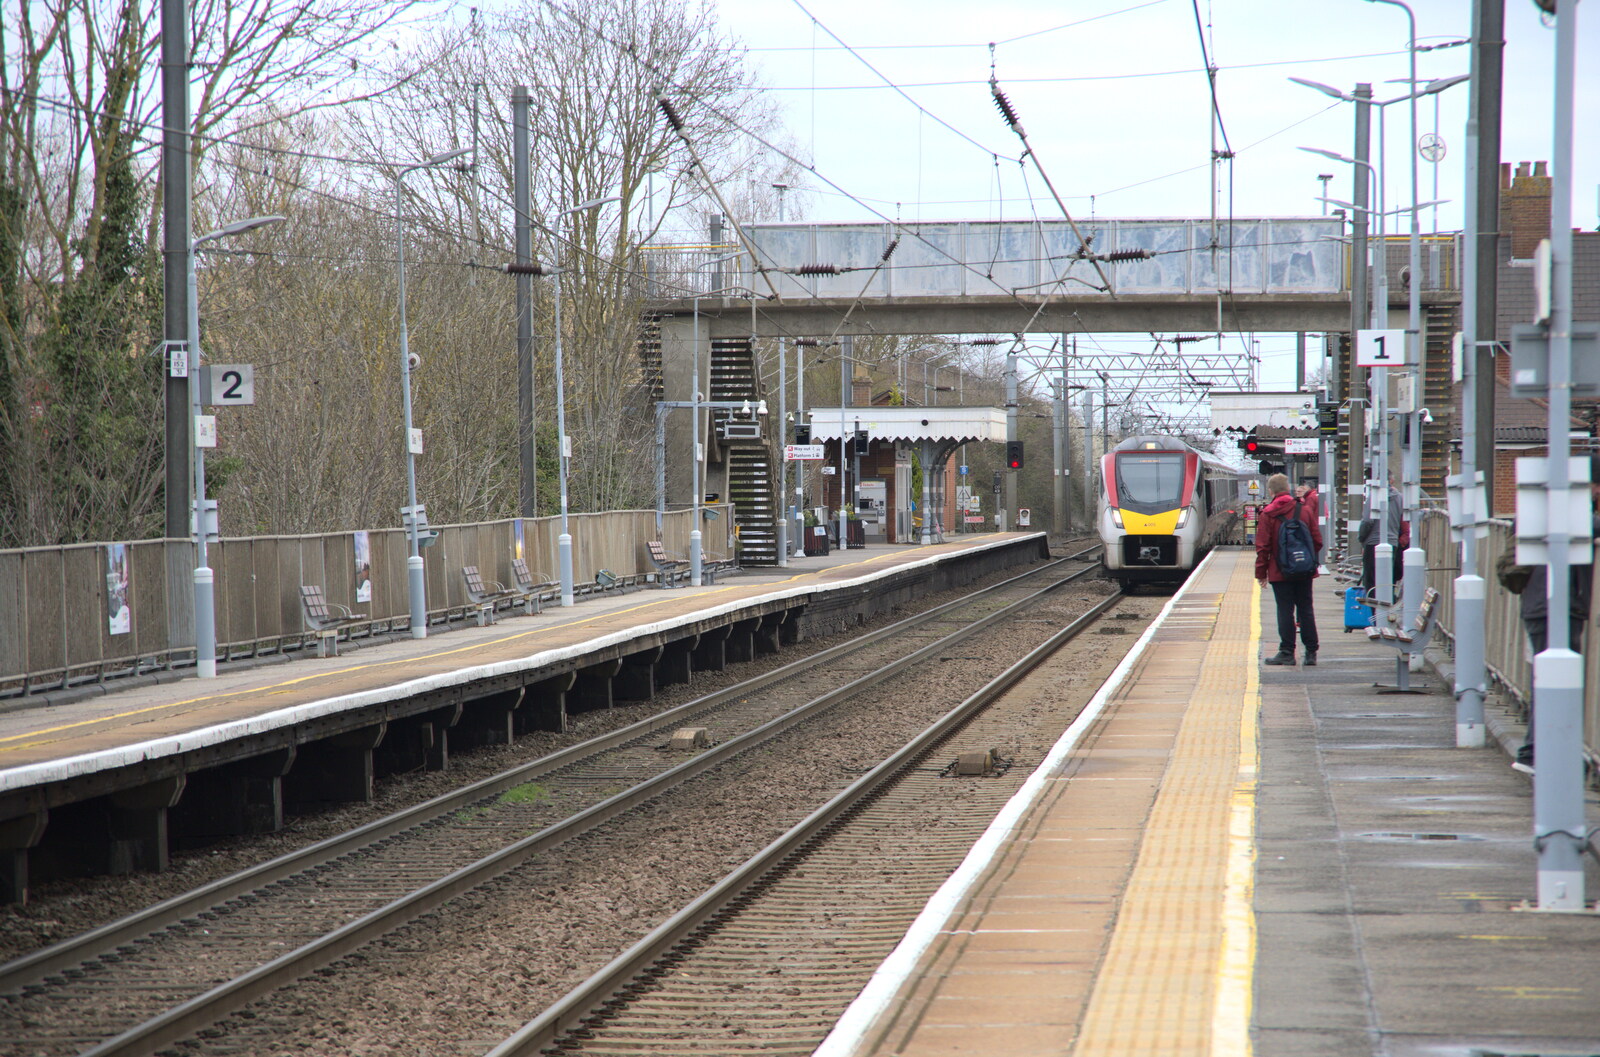 The train to London rocks up at Diss Station from A Day in New Milton, Hampshire - 3rd April 2023